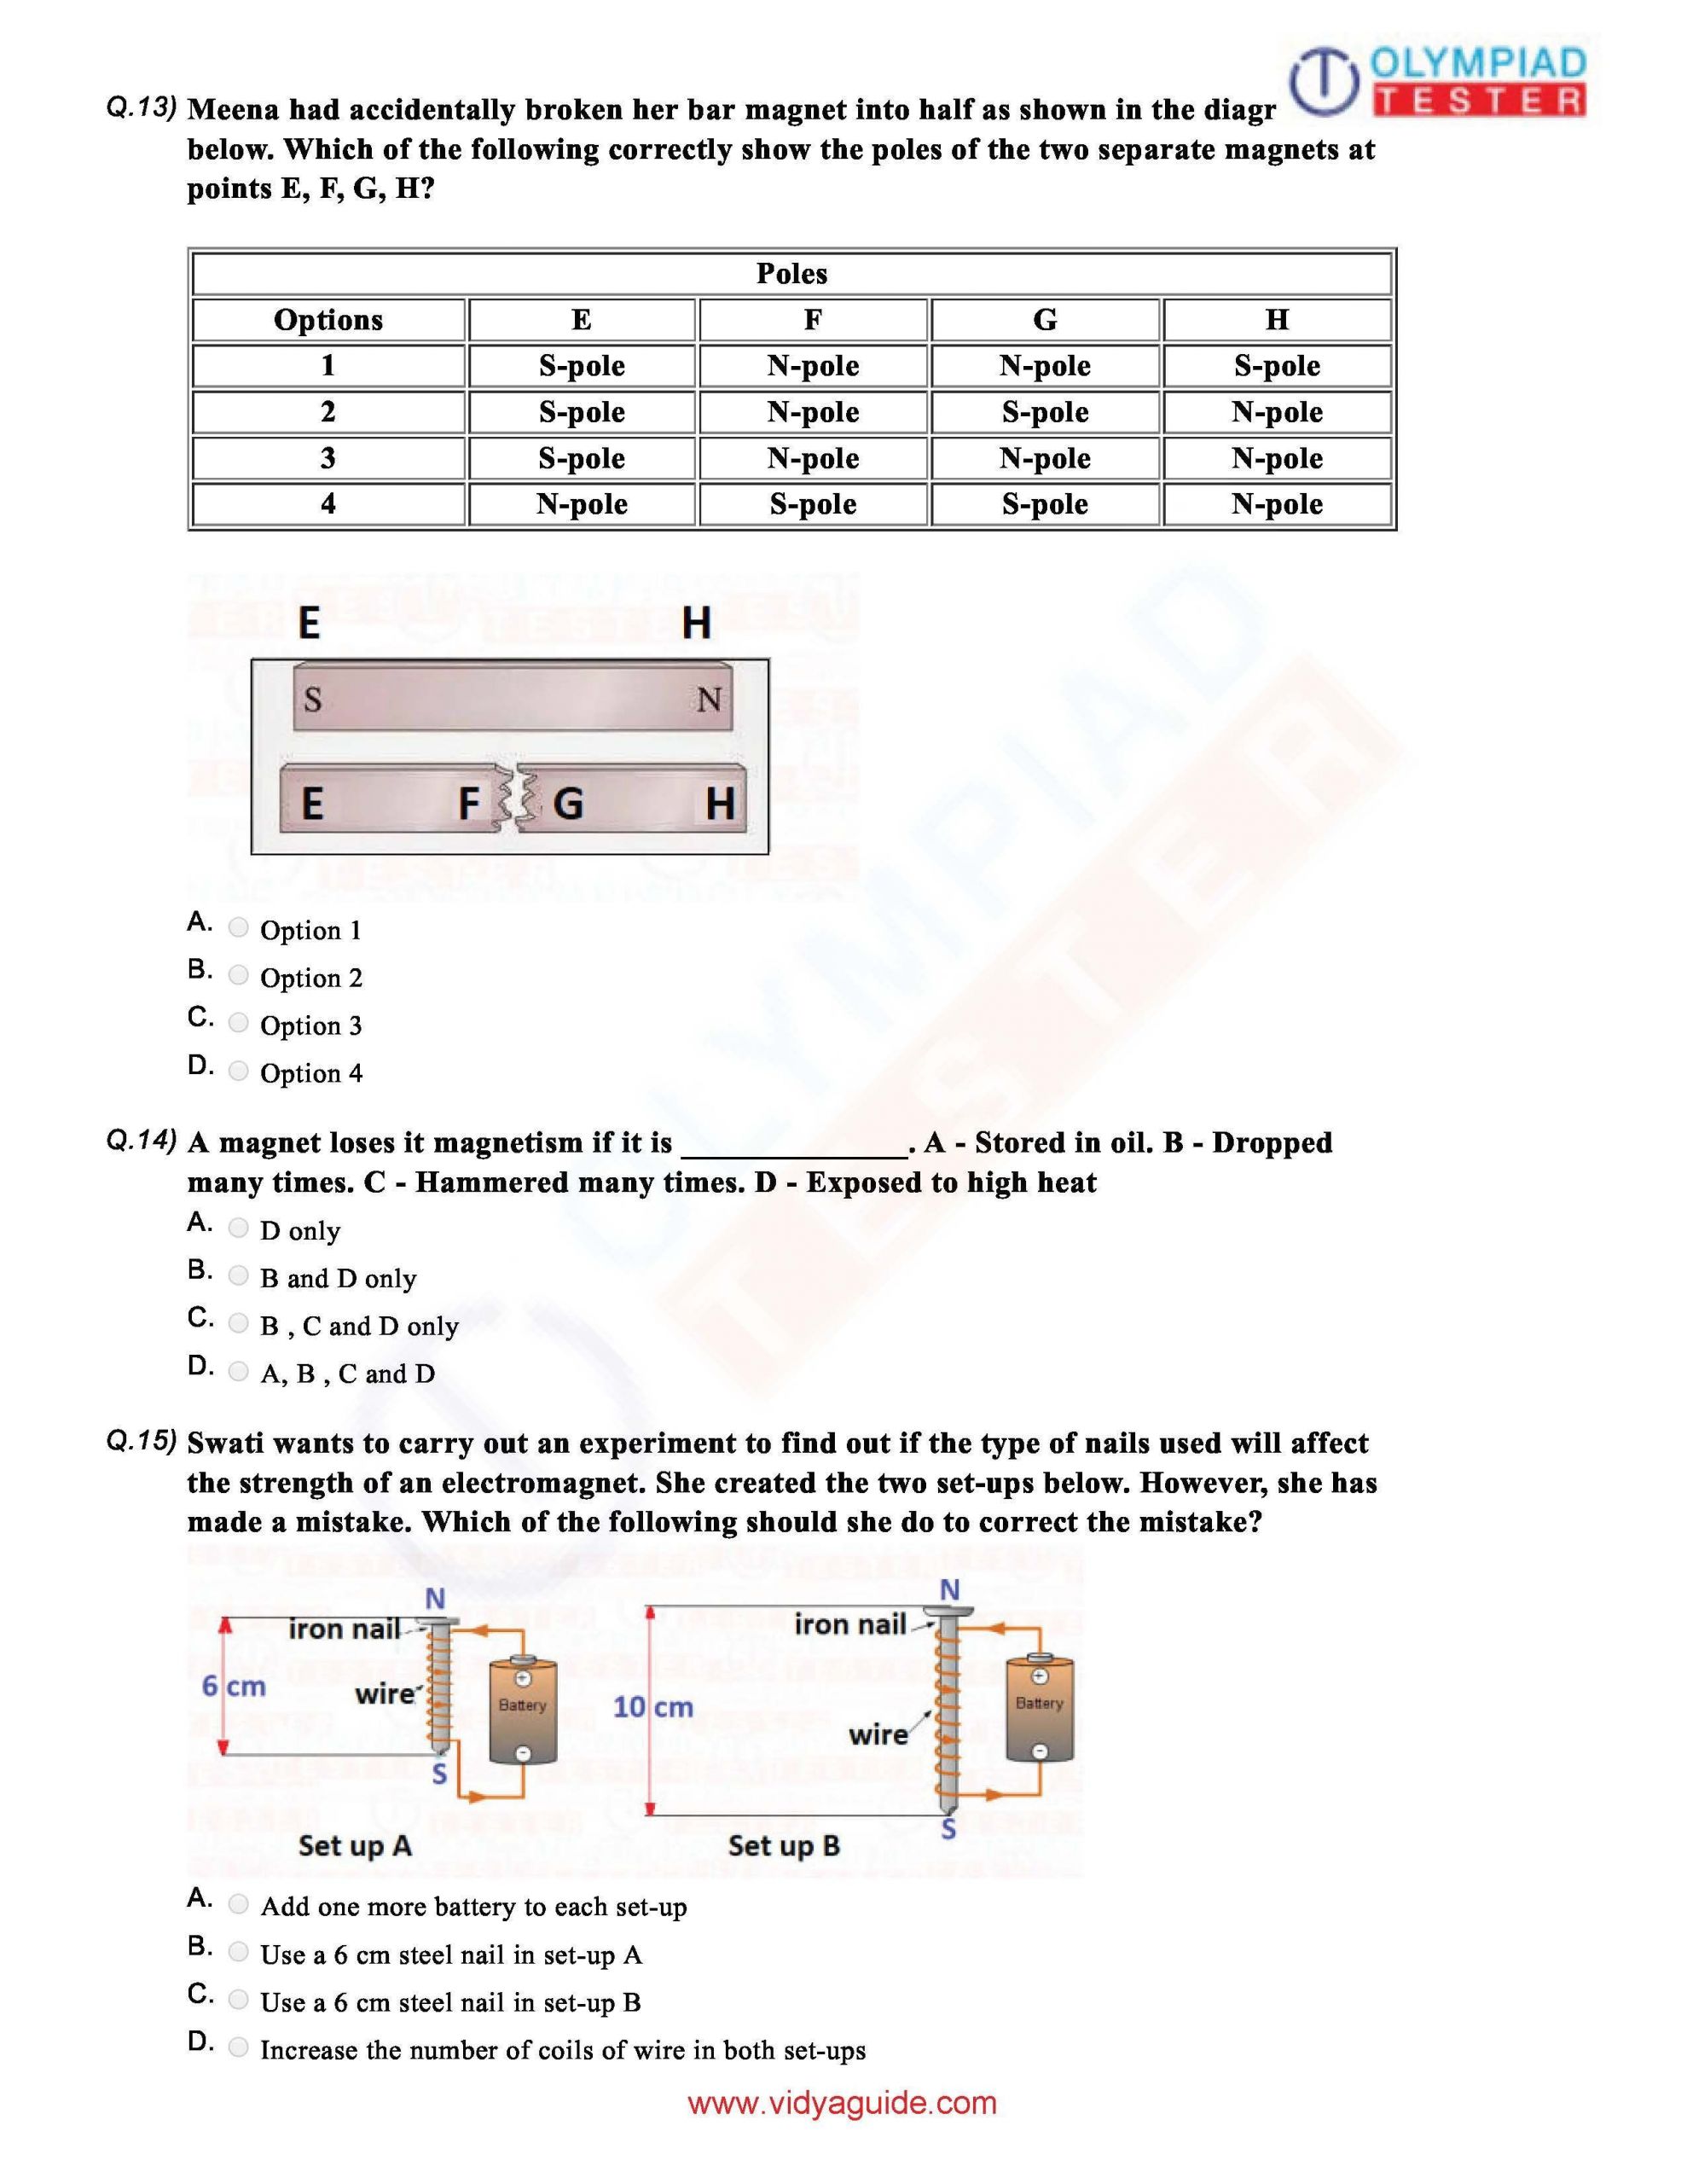 Free Math Worksheets Second Grade 2 Counting Money Money In Words